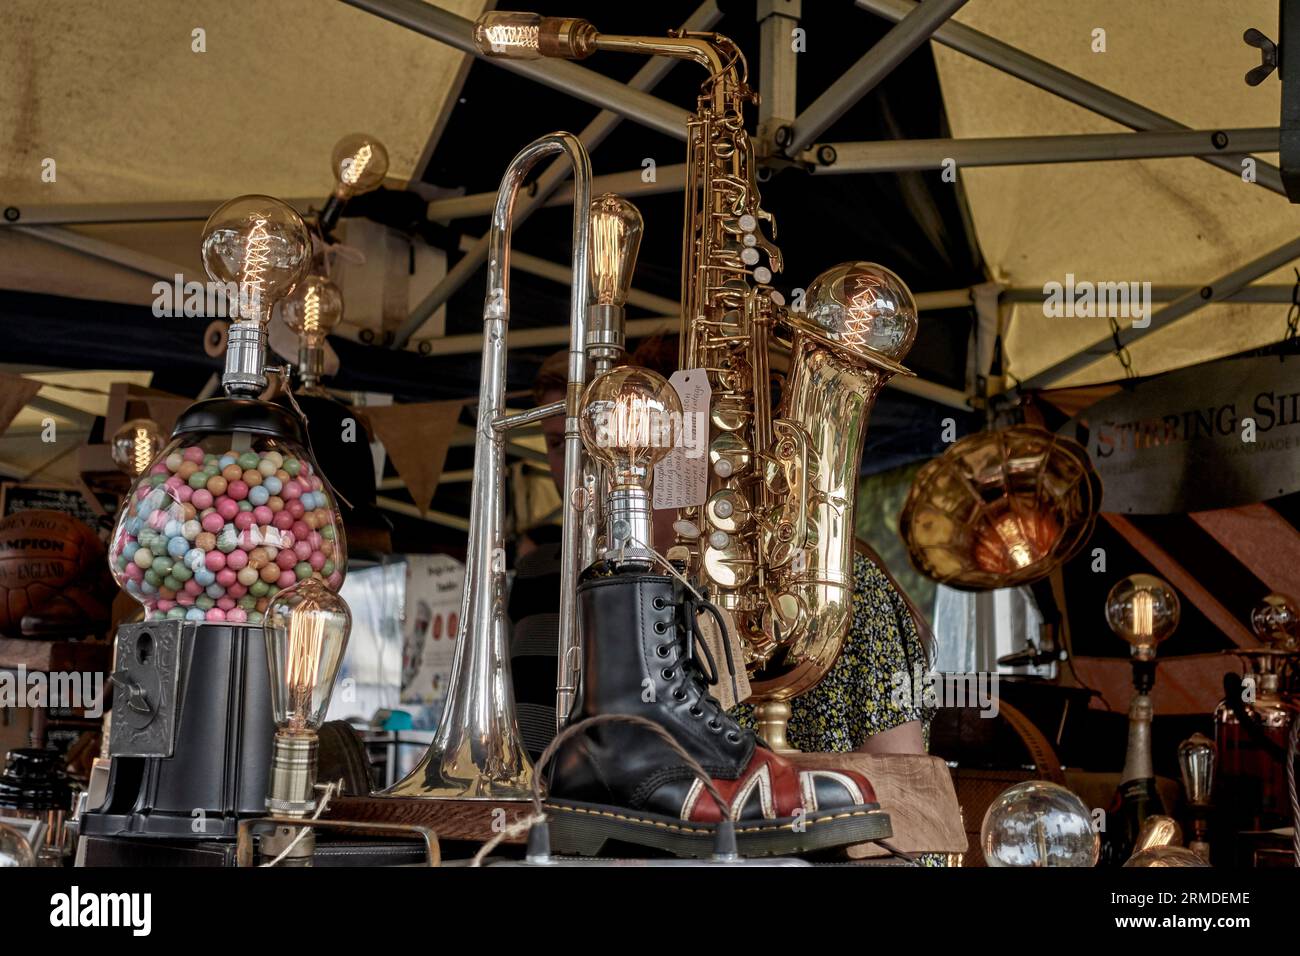 Unusual conversion of English vintage and antique items to provide household table lamp lighting. England UK market stall Stock Photo